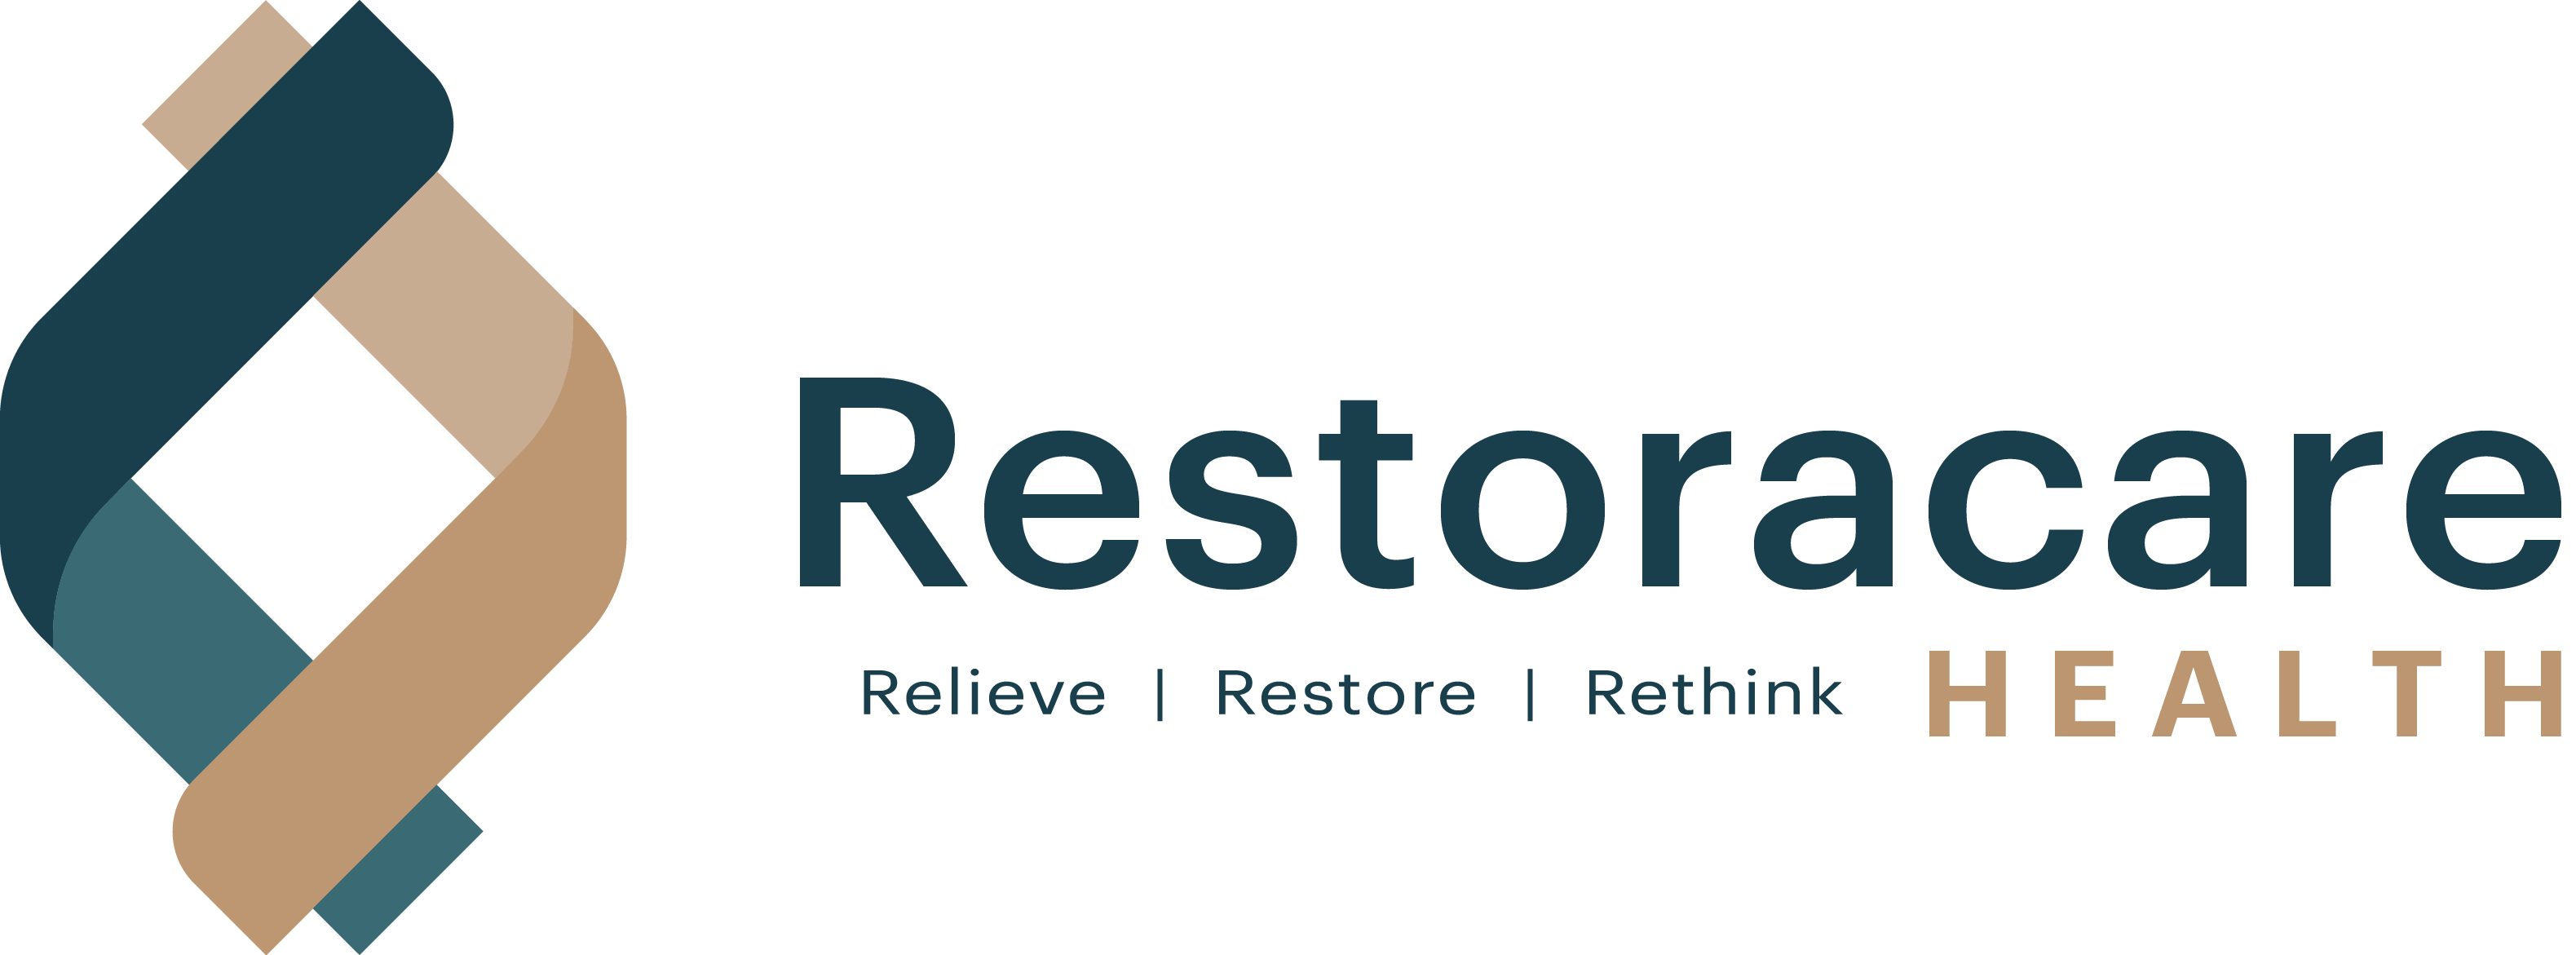 Restoracare Health - Chiropractor, Physical Therapy, Massage Therapy